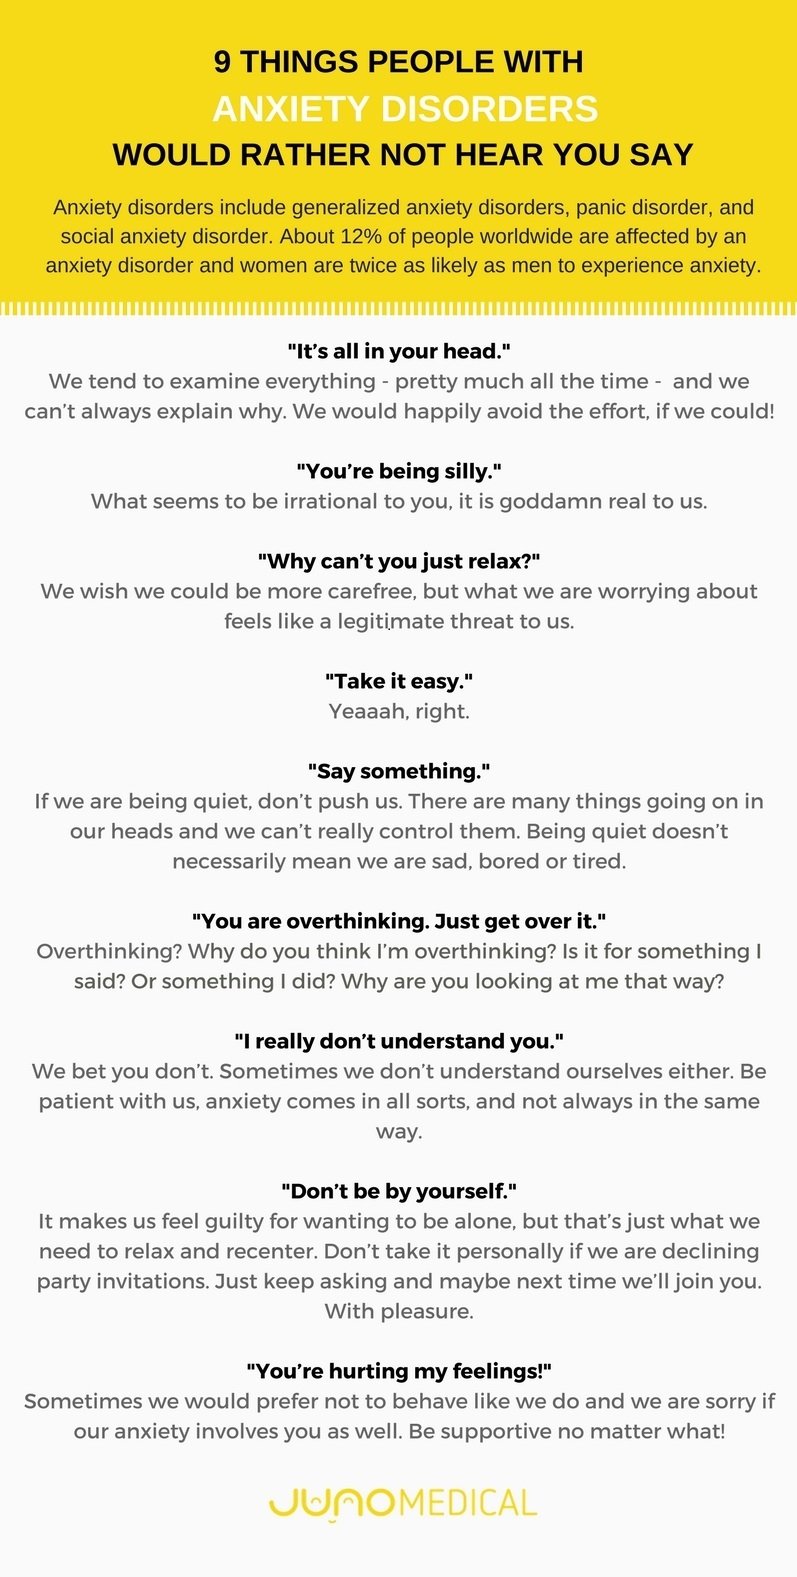 9 things people with anxiety would rather not hear you say ...